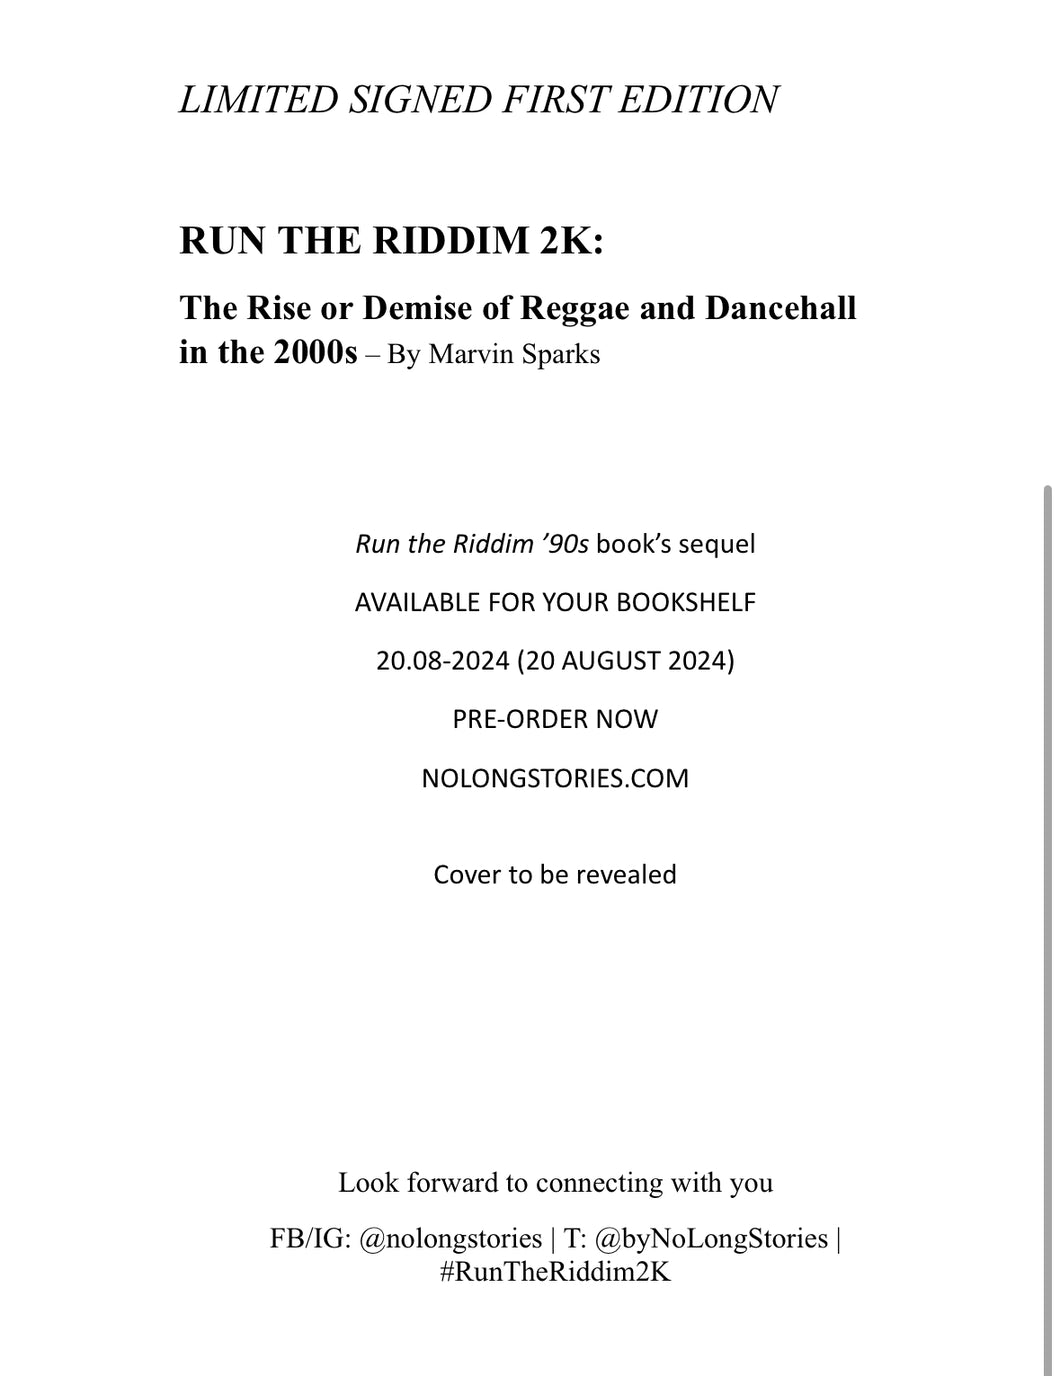 Limited Signed First Edition - Run The Riddim 2K